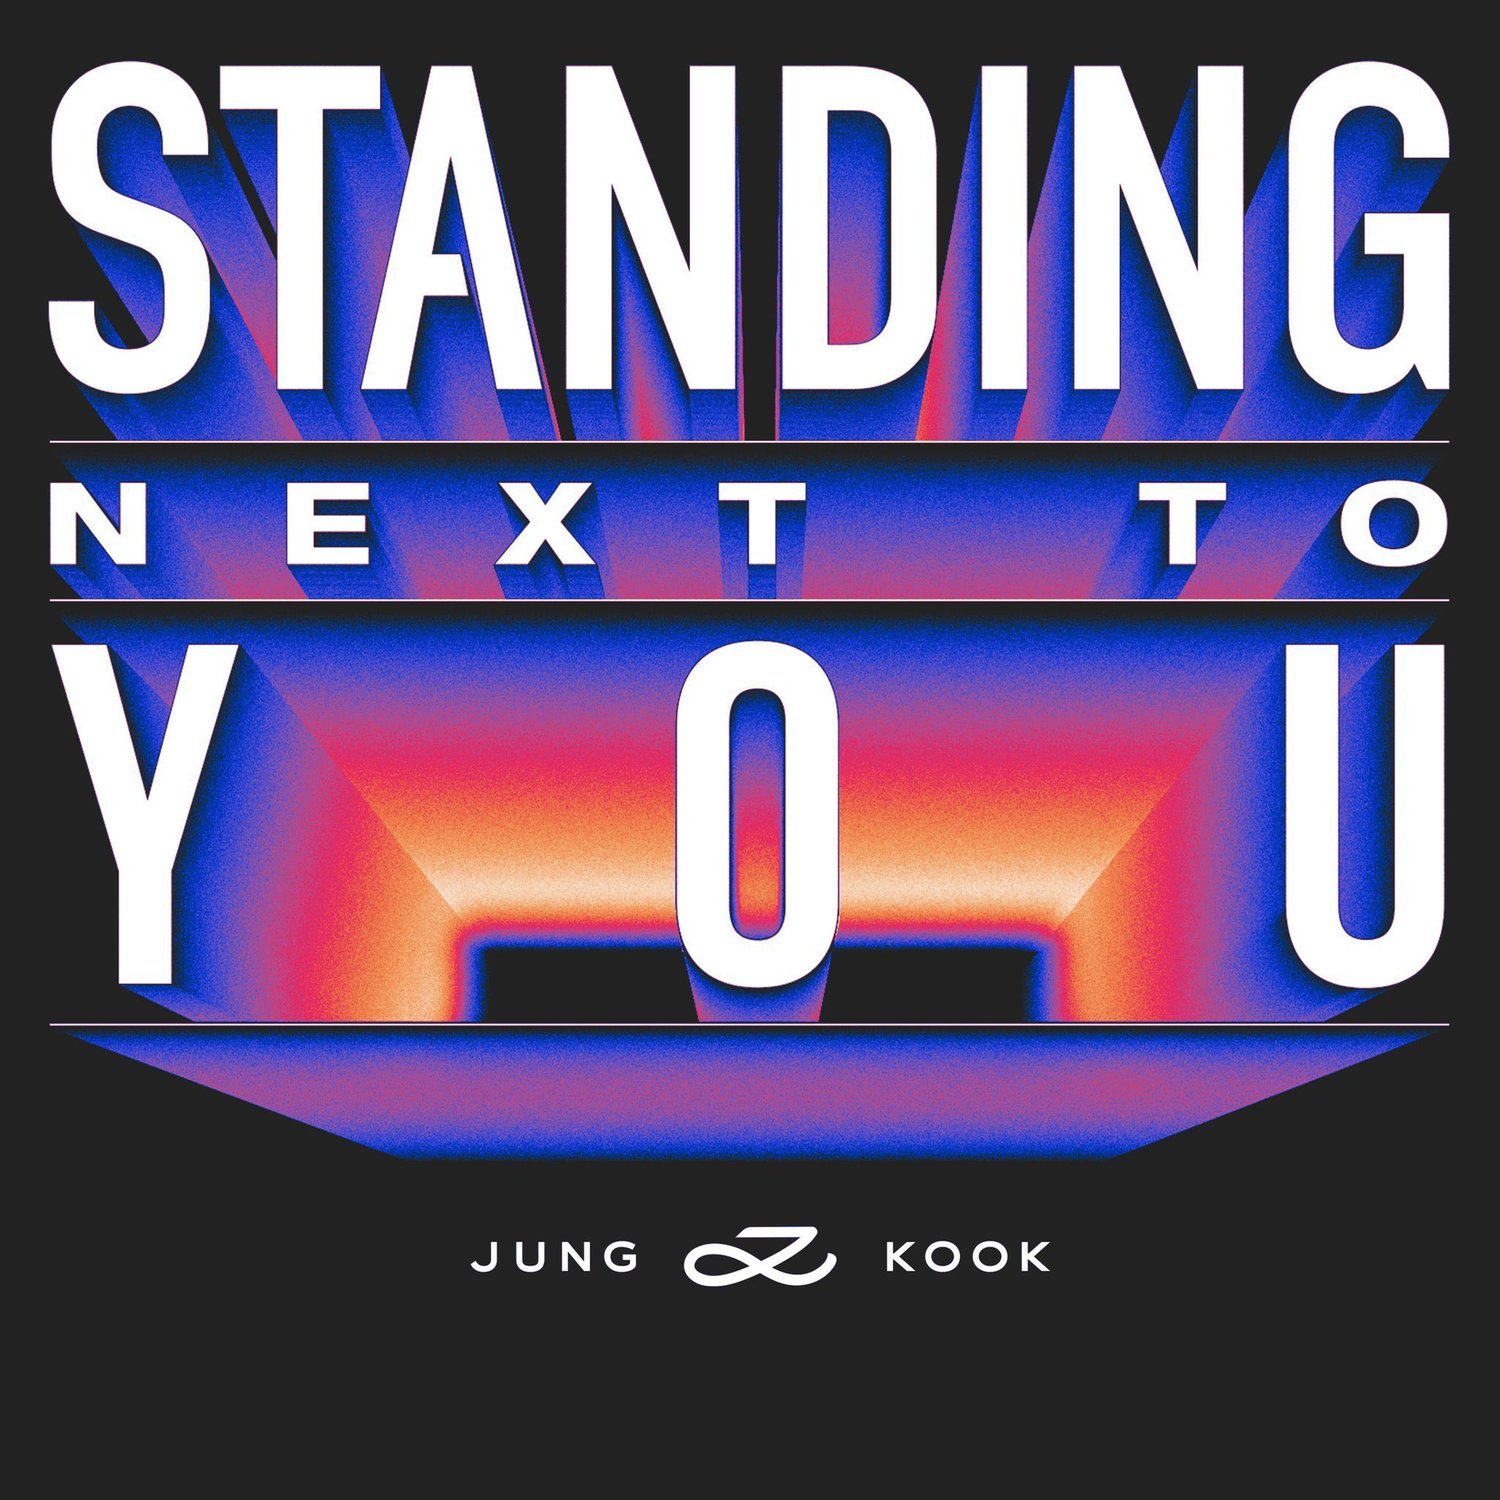 BTS Jungkook's Standing Next to You Solo Album Release Date - News